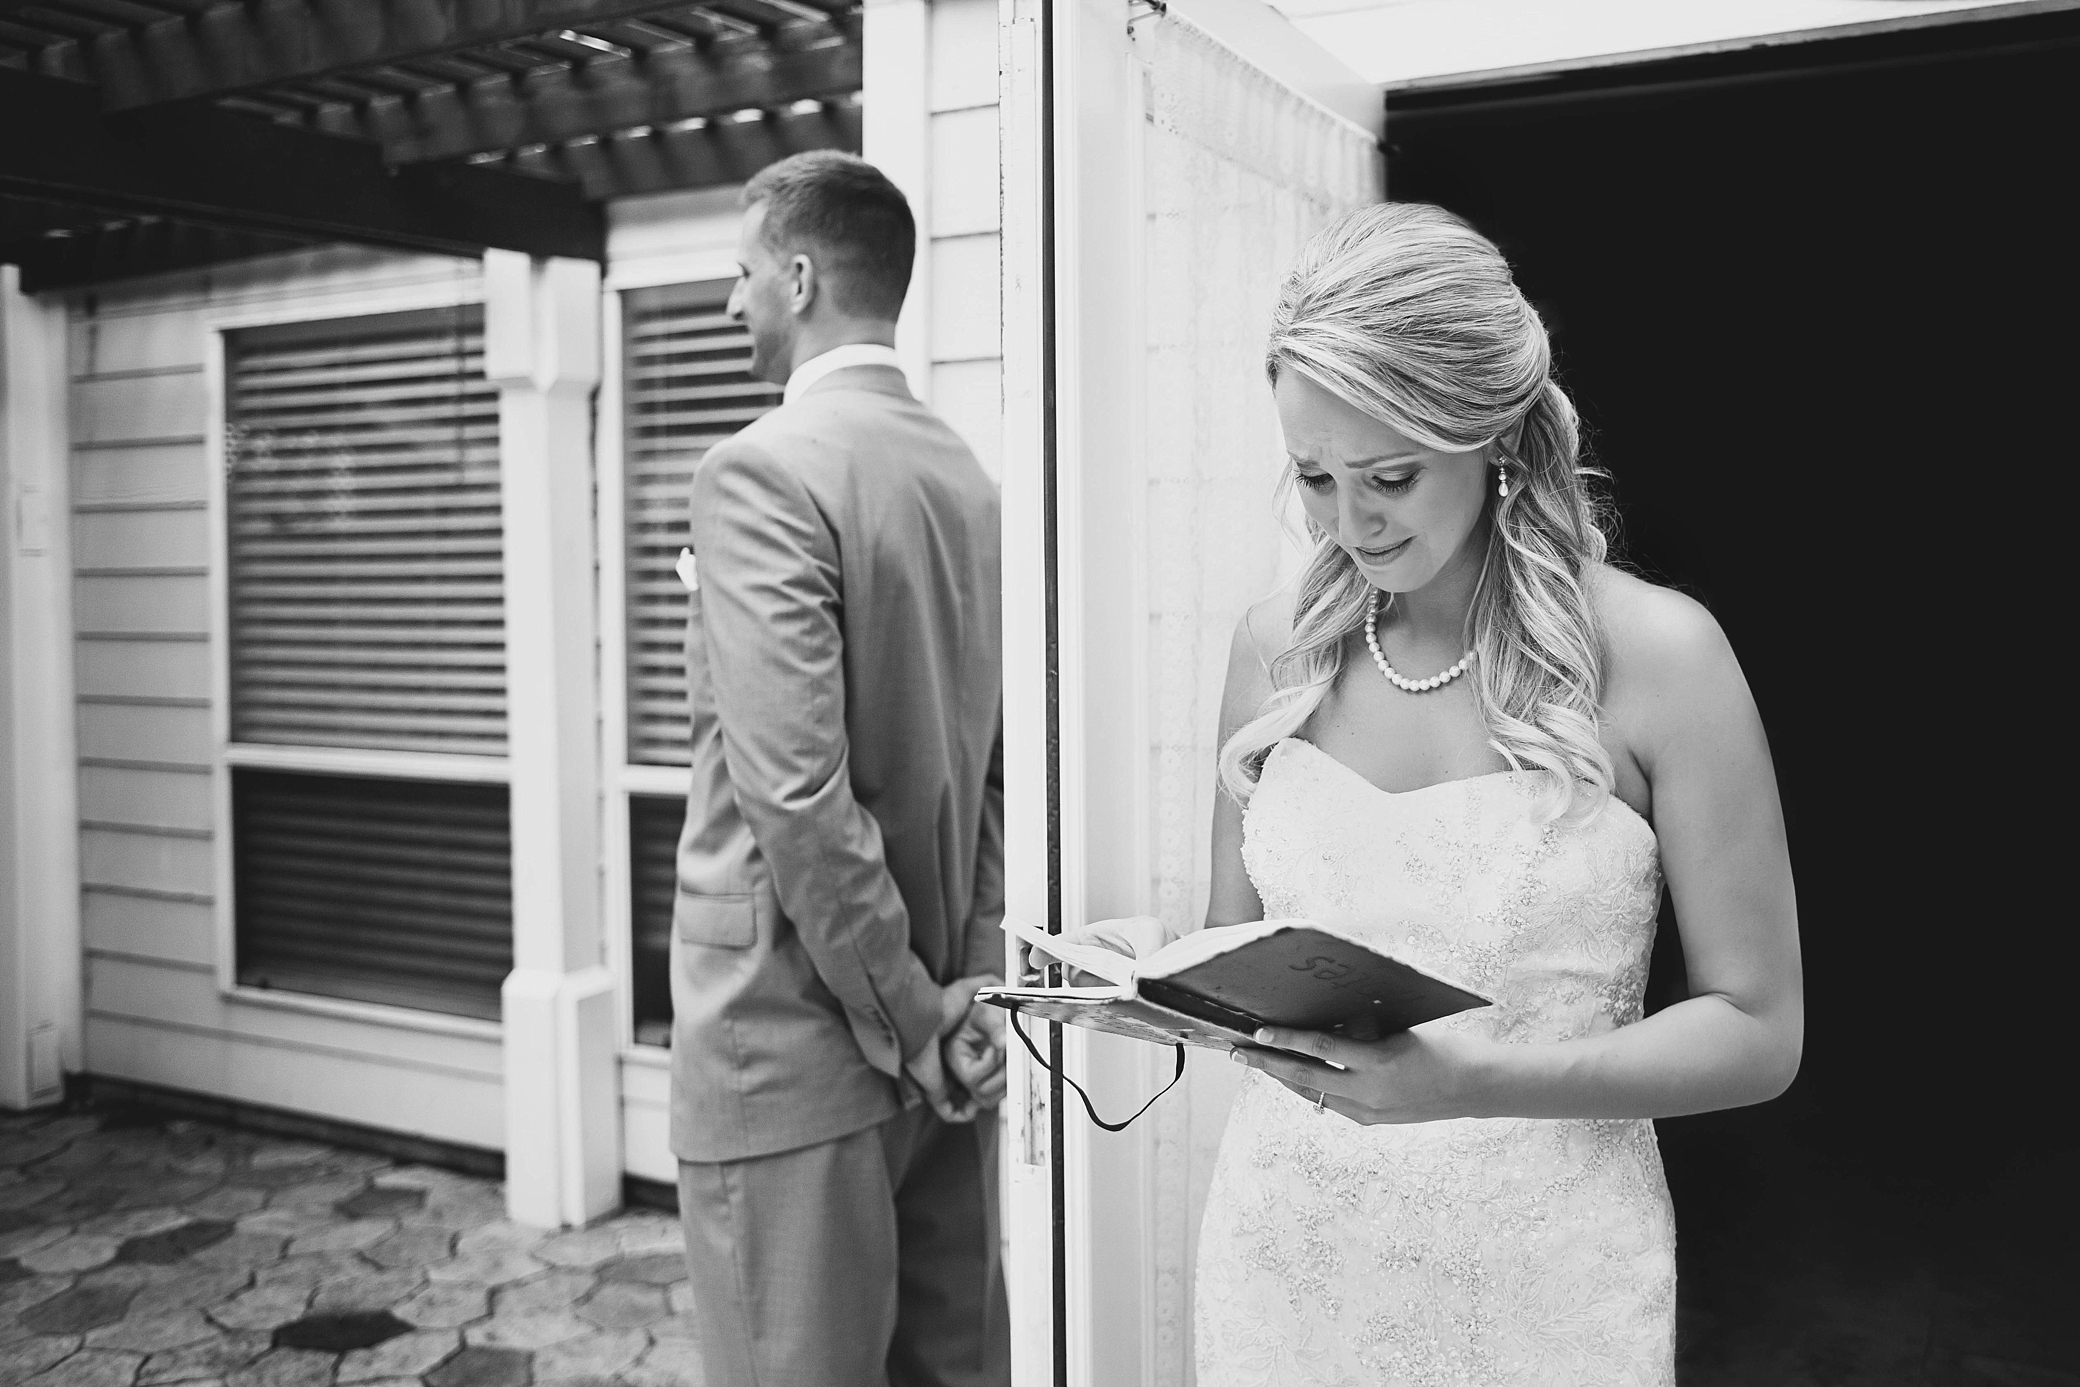 Emotional moment between bride and groom before their wedding | | Must Have Moments on Your Wedding Day